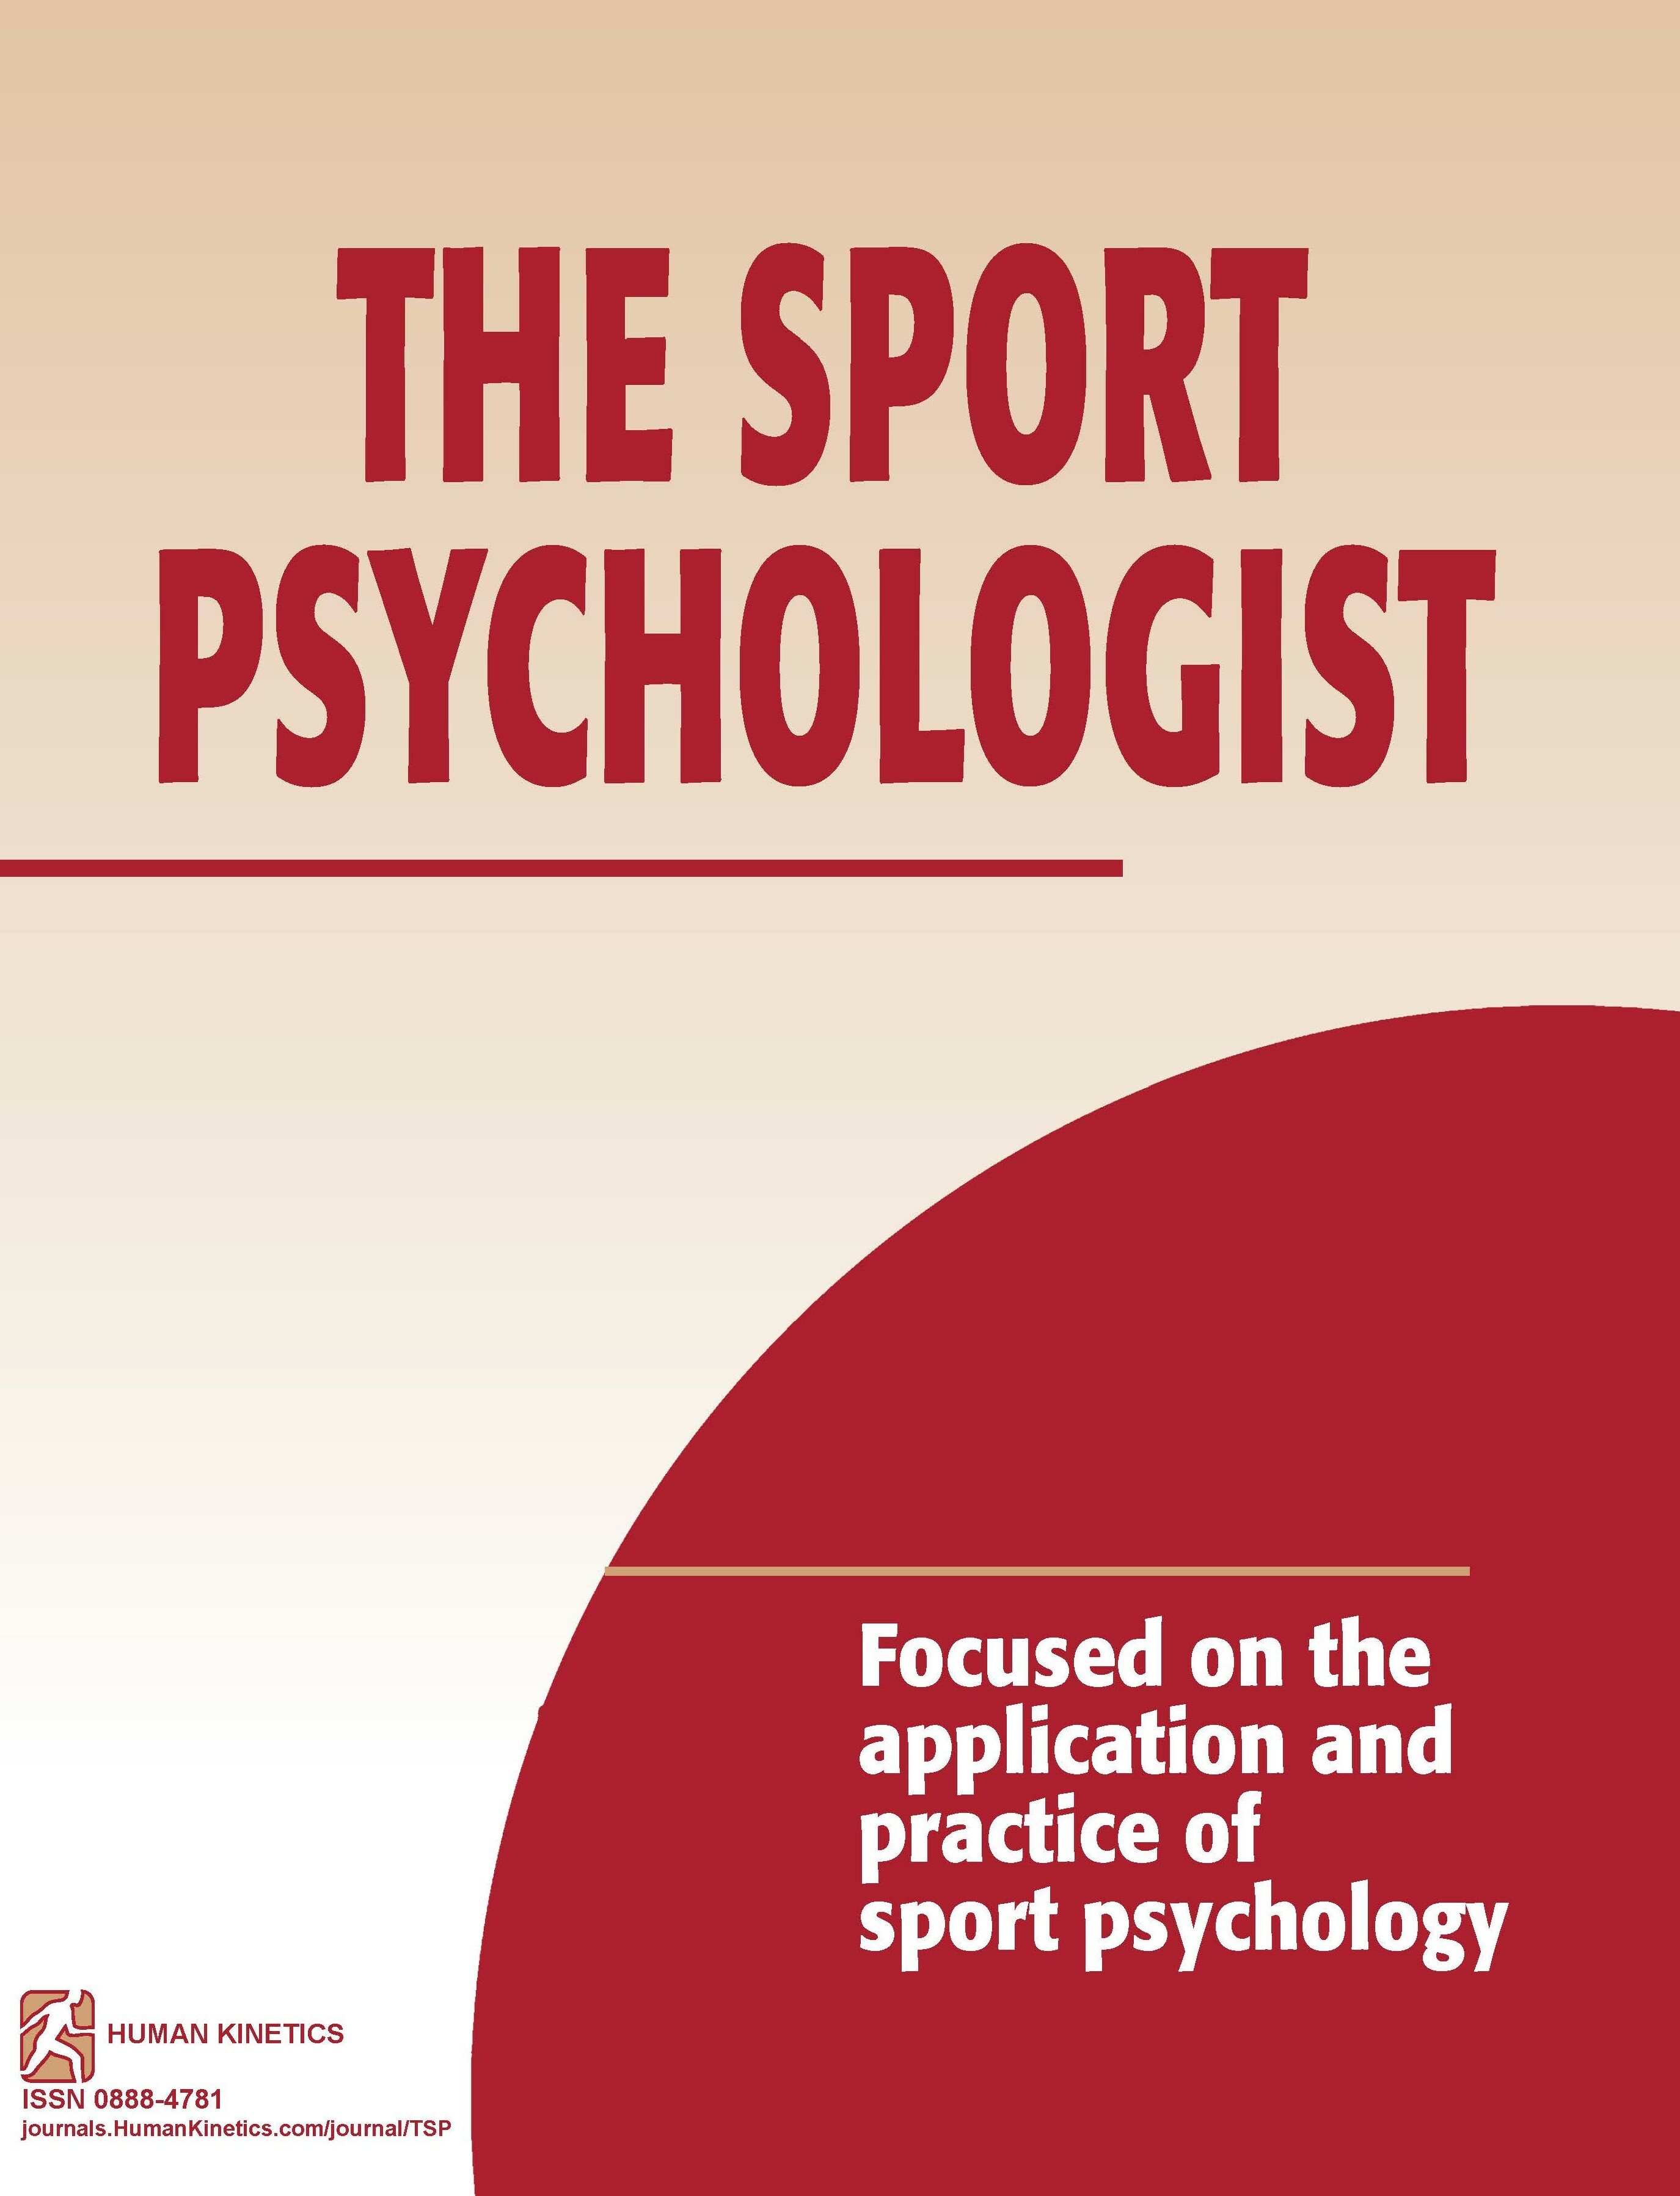 The Inducers of an Elite Male Table Tennis Player’s Emotional Experience Throughout His Career: A Single Case Study Based on the Critical-Incident Method